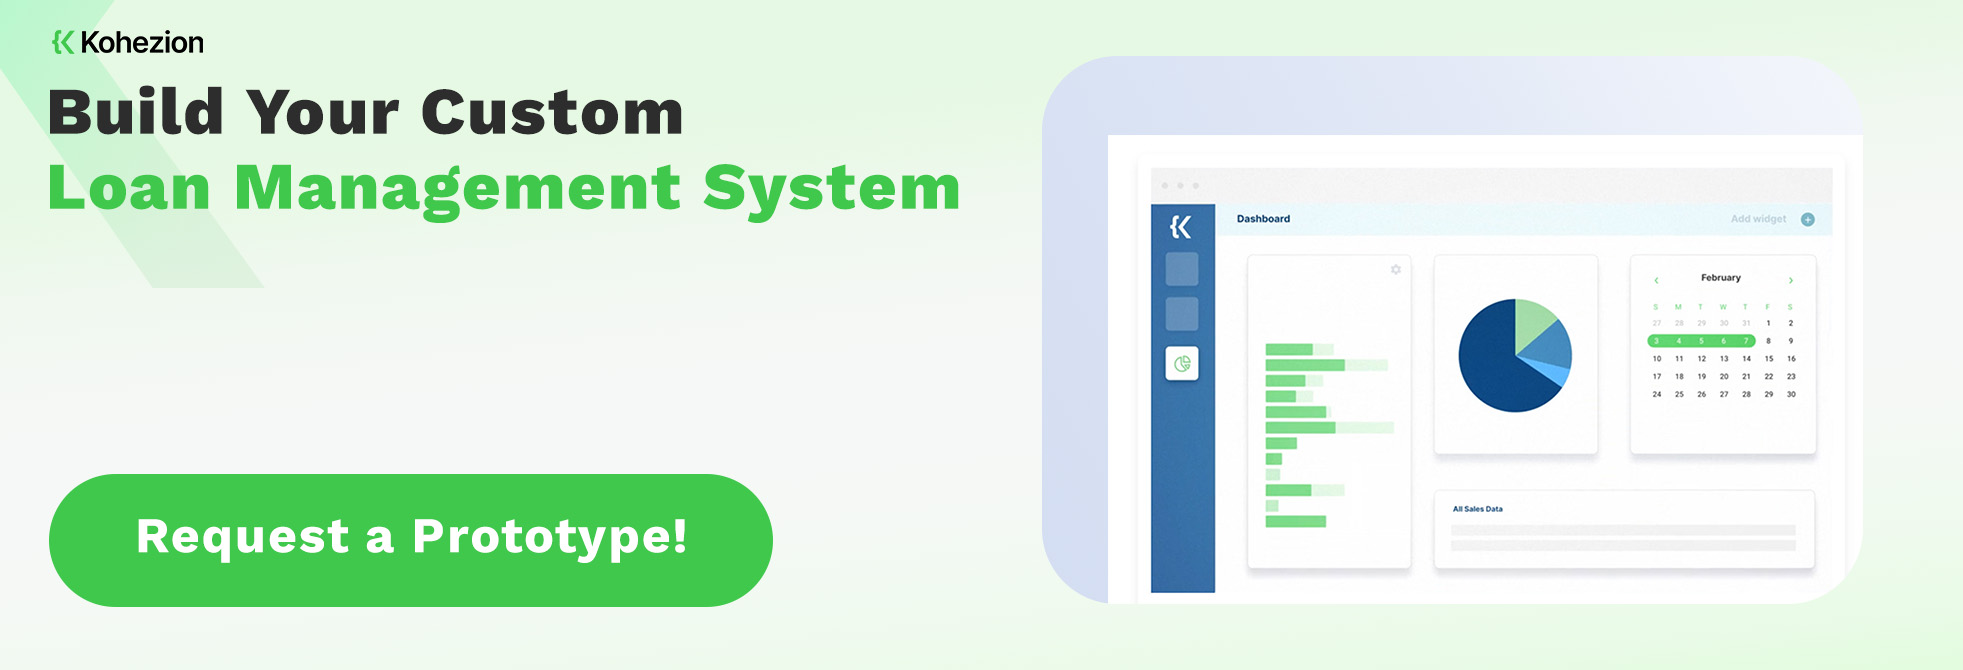 cta banner Build Your Custom Loan Management System with kohezion